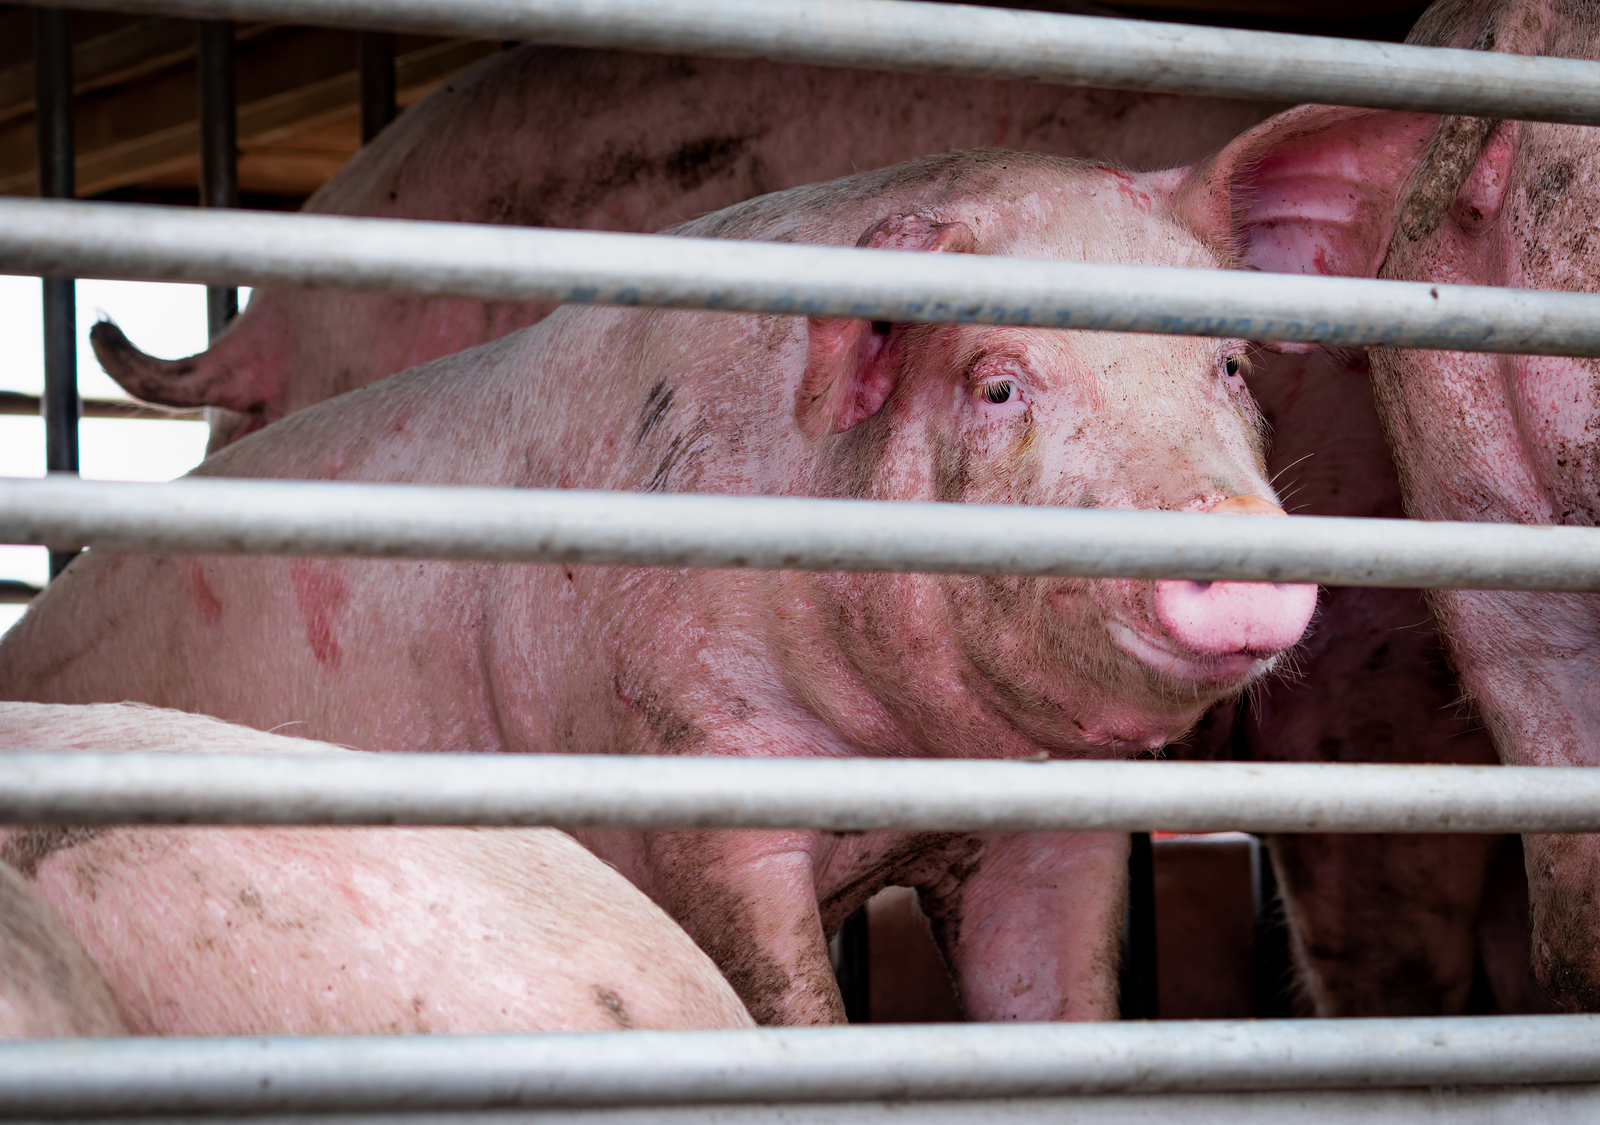 Federal Appeals Court in NC Says Undercover Filming of Animal Farms is Protected Speech